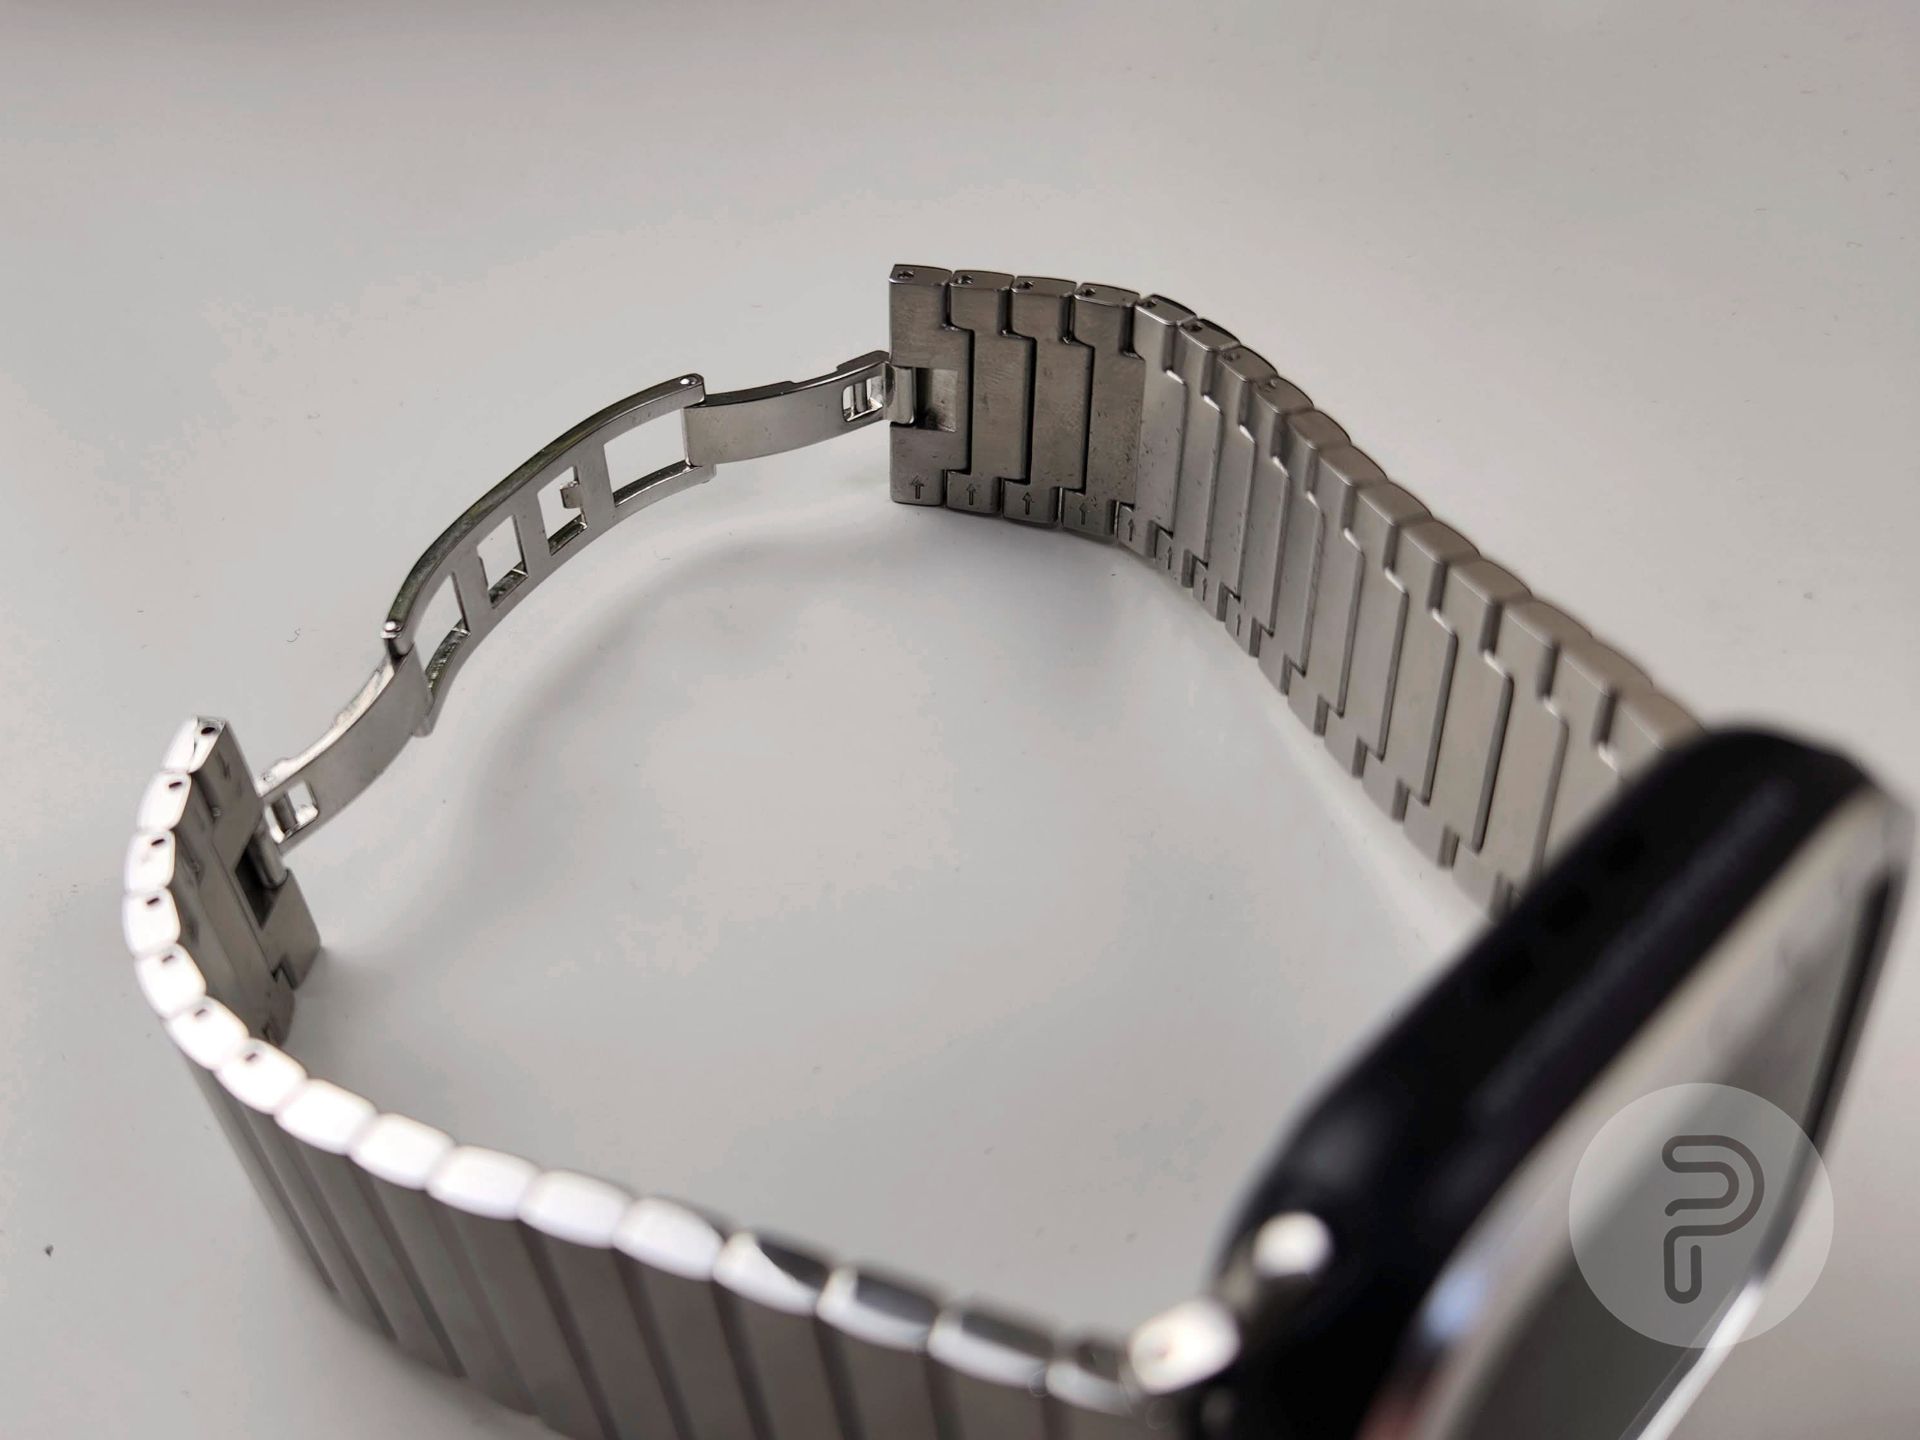 CASETiFY Monolink band for Apple Watch - 2